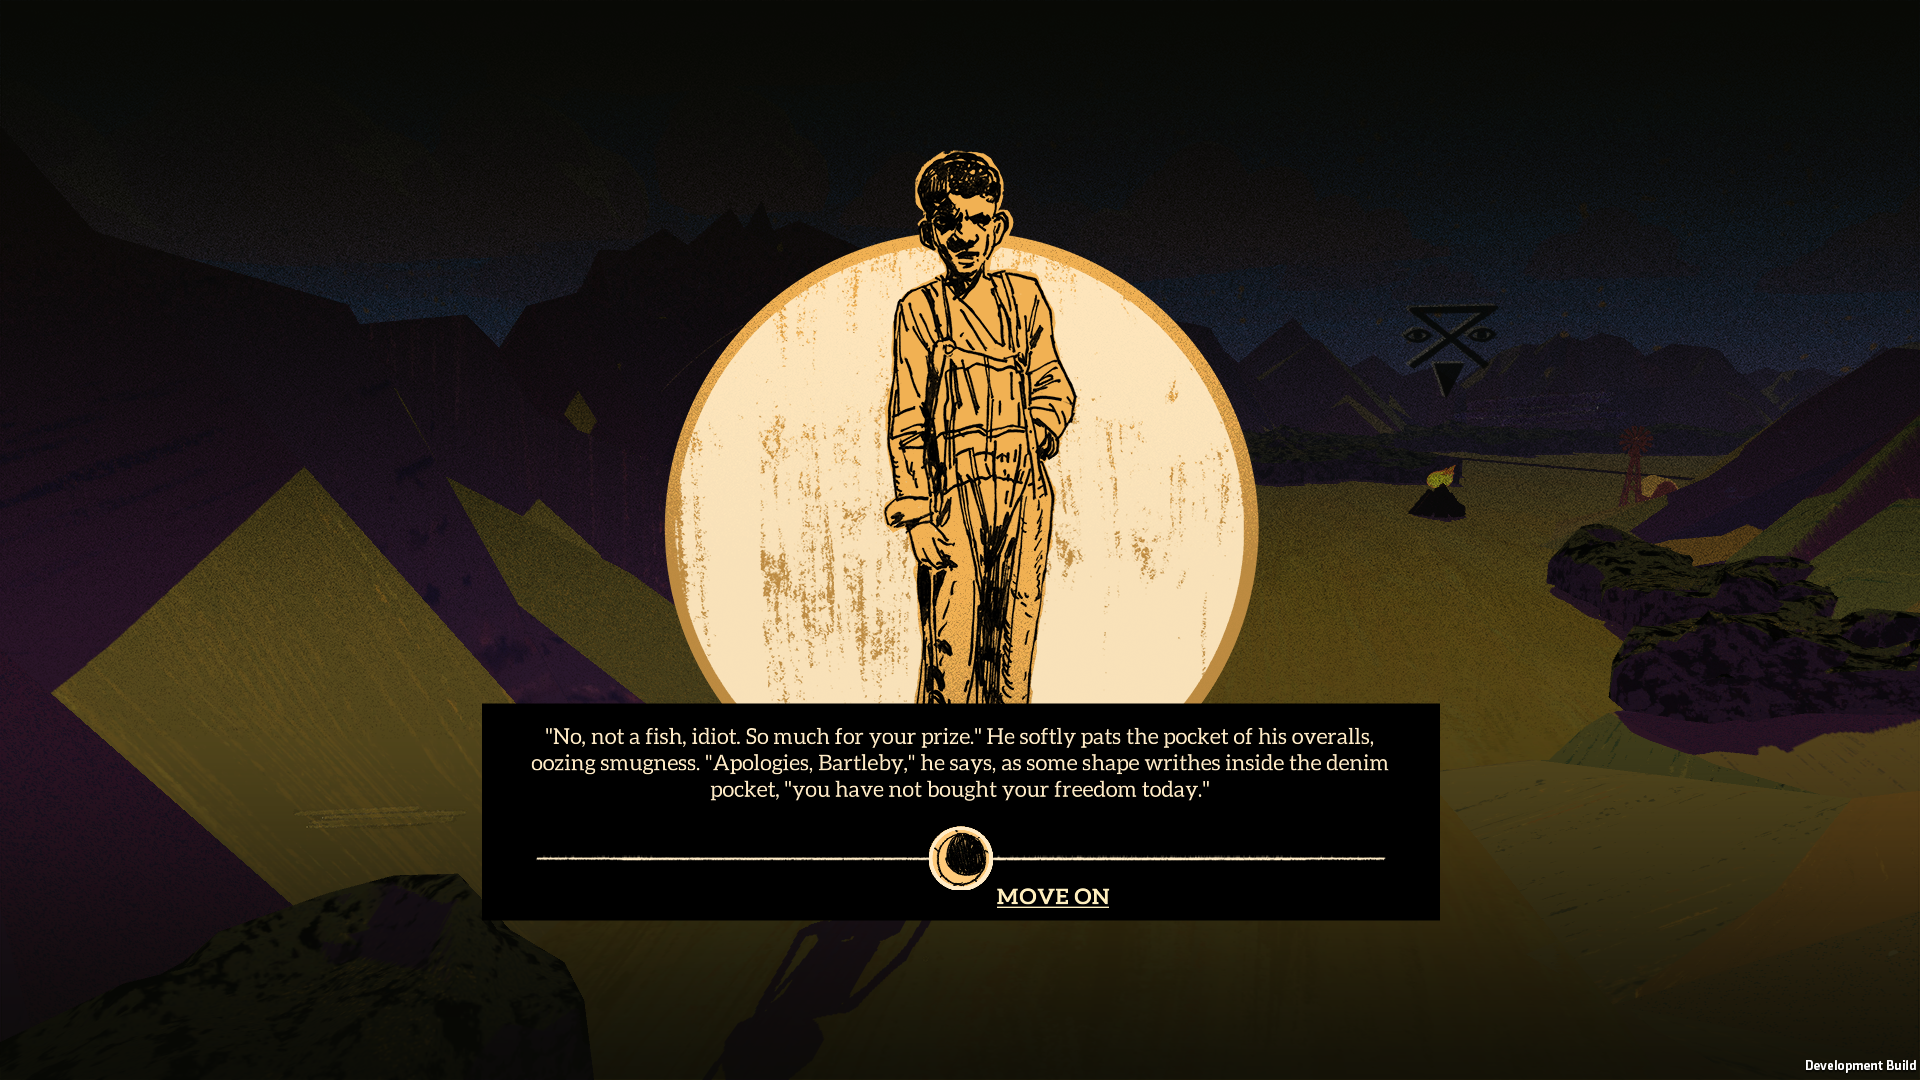 One of the game's stories. A boy has something in his pocket and after talking to the narrator says it hasn't bought its freedom yet